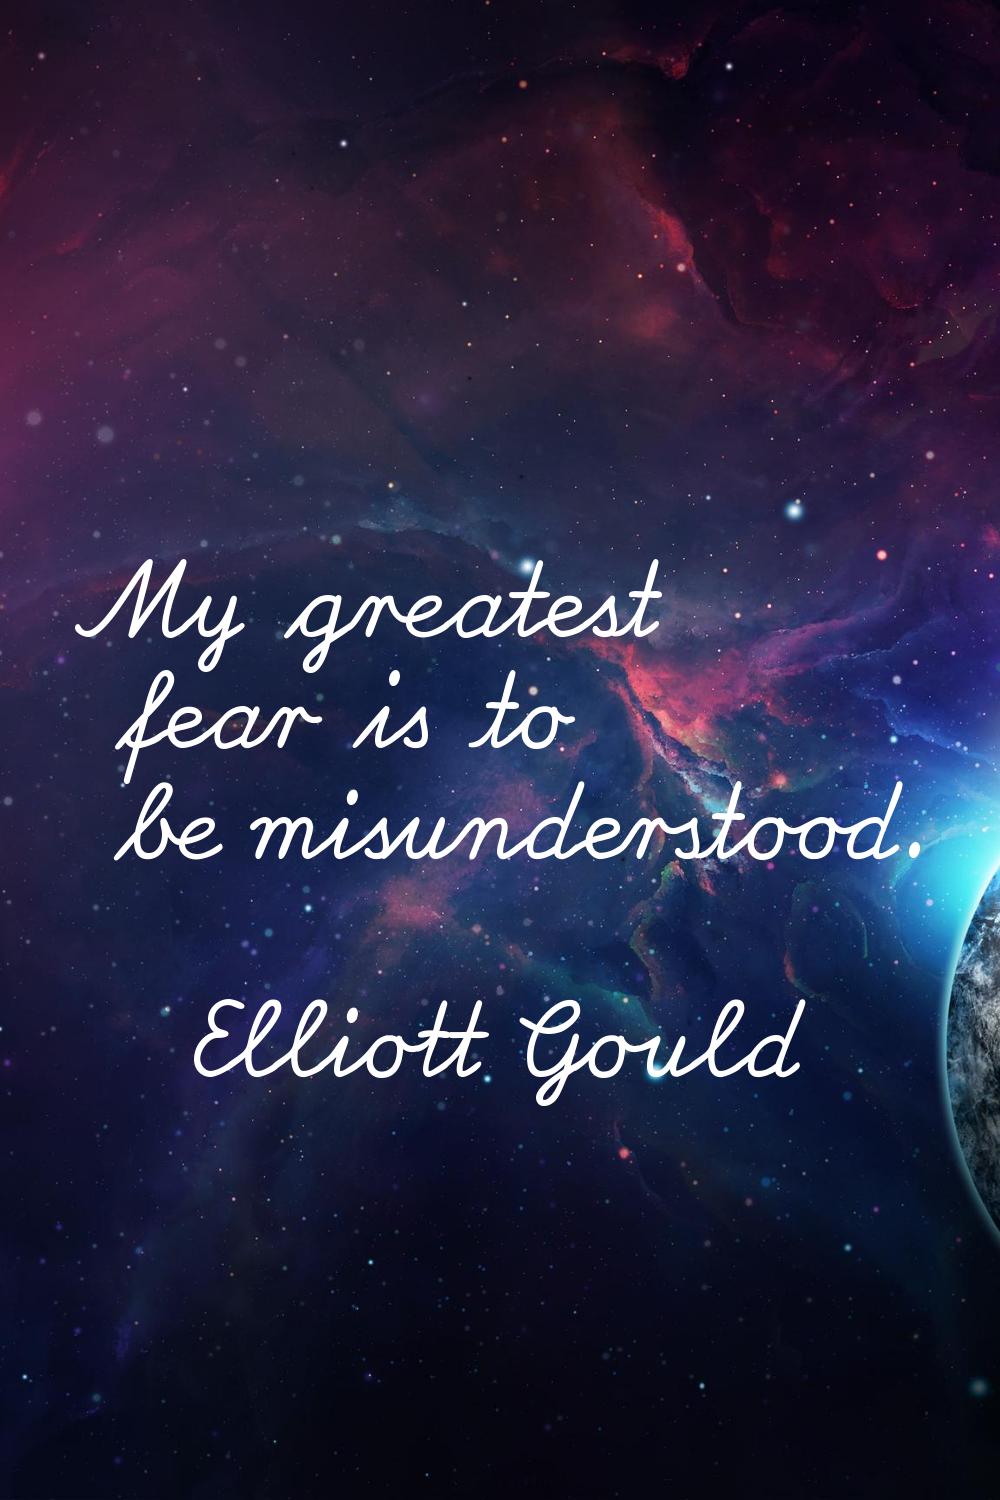 My greatest fear is to be misunderstood.